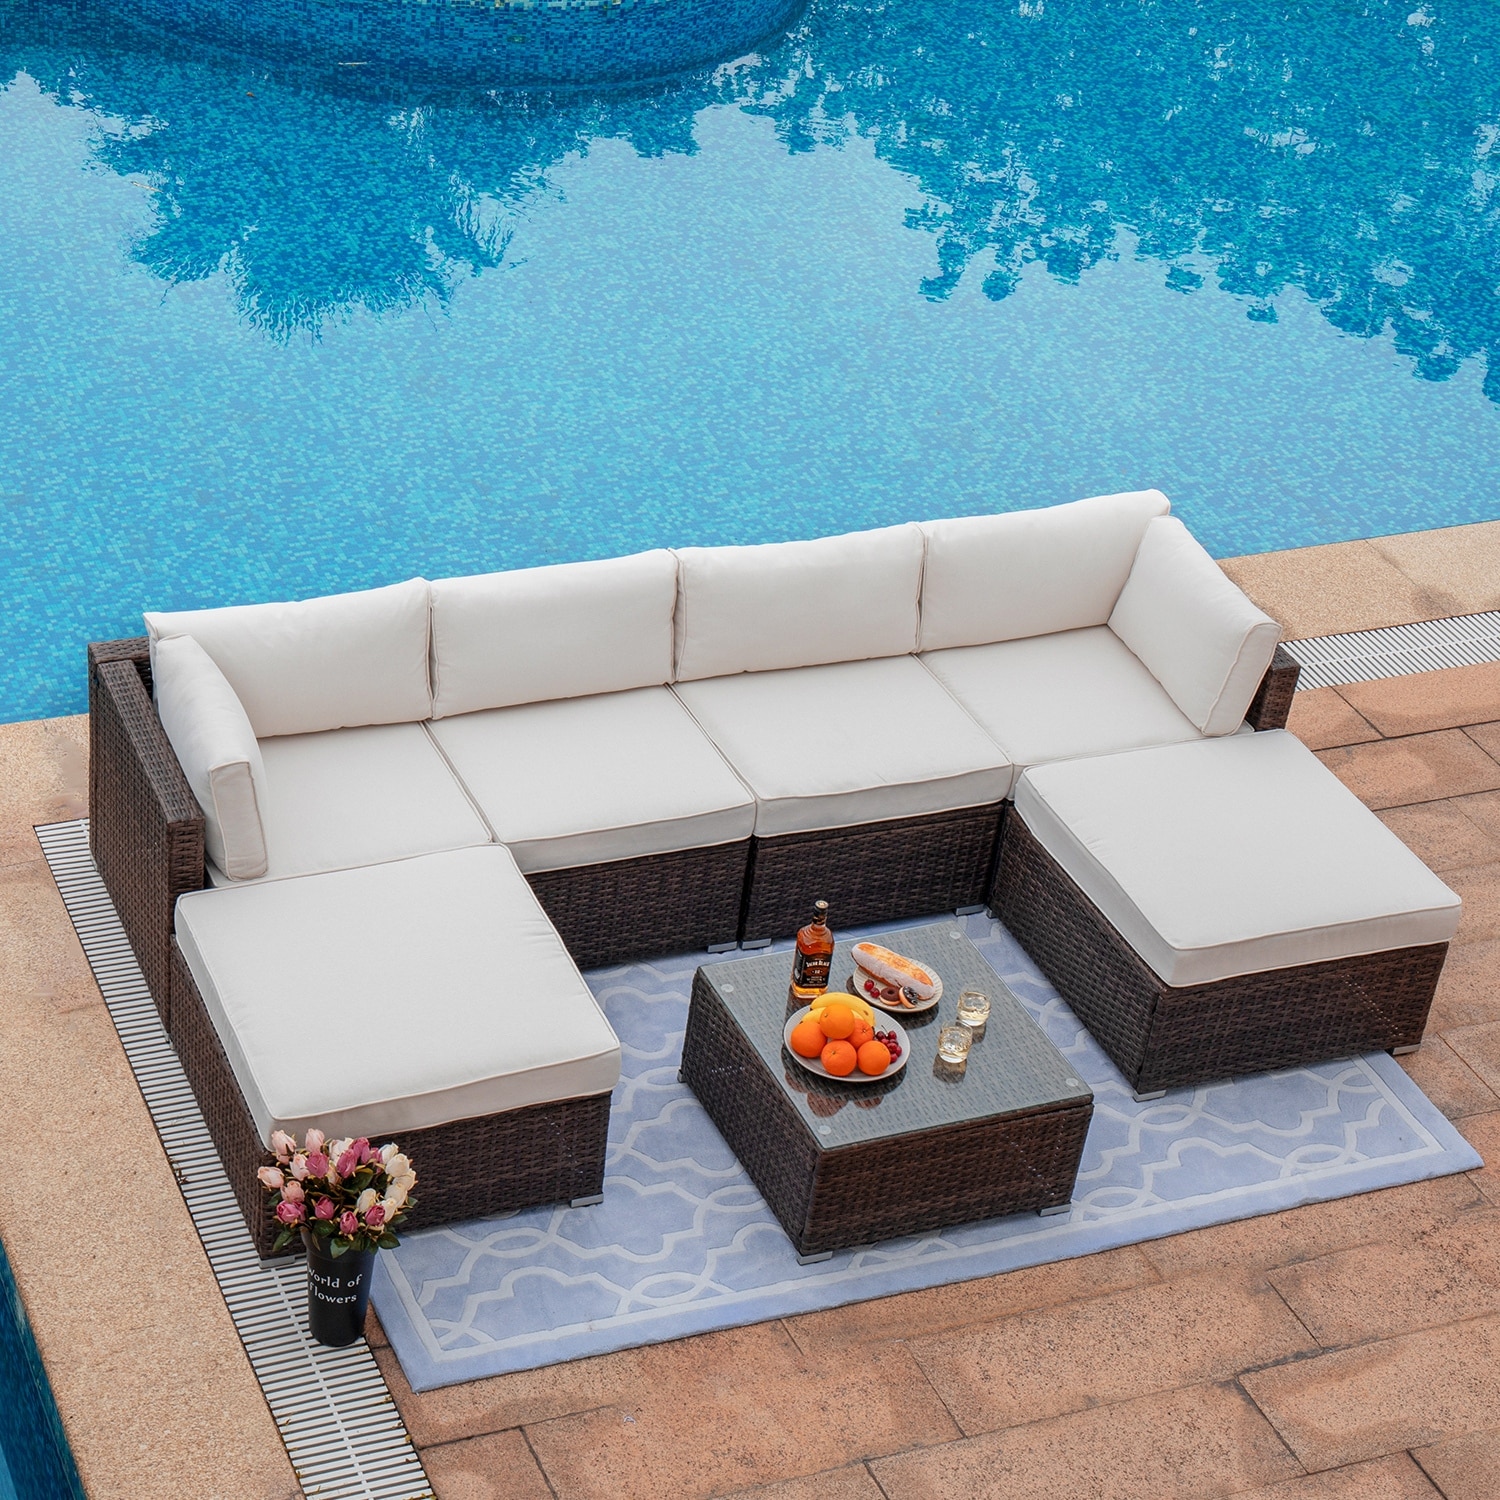 Cosiest 7-piece Outdoor Patio Wicker Sectional Sofa With Coffee Table